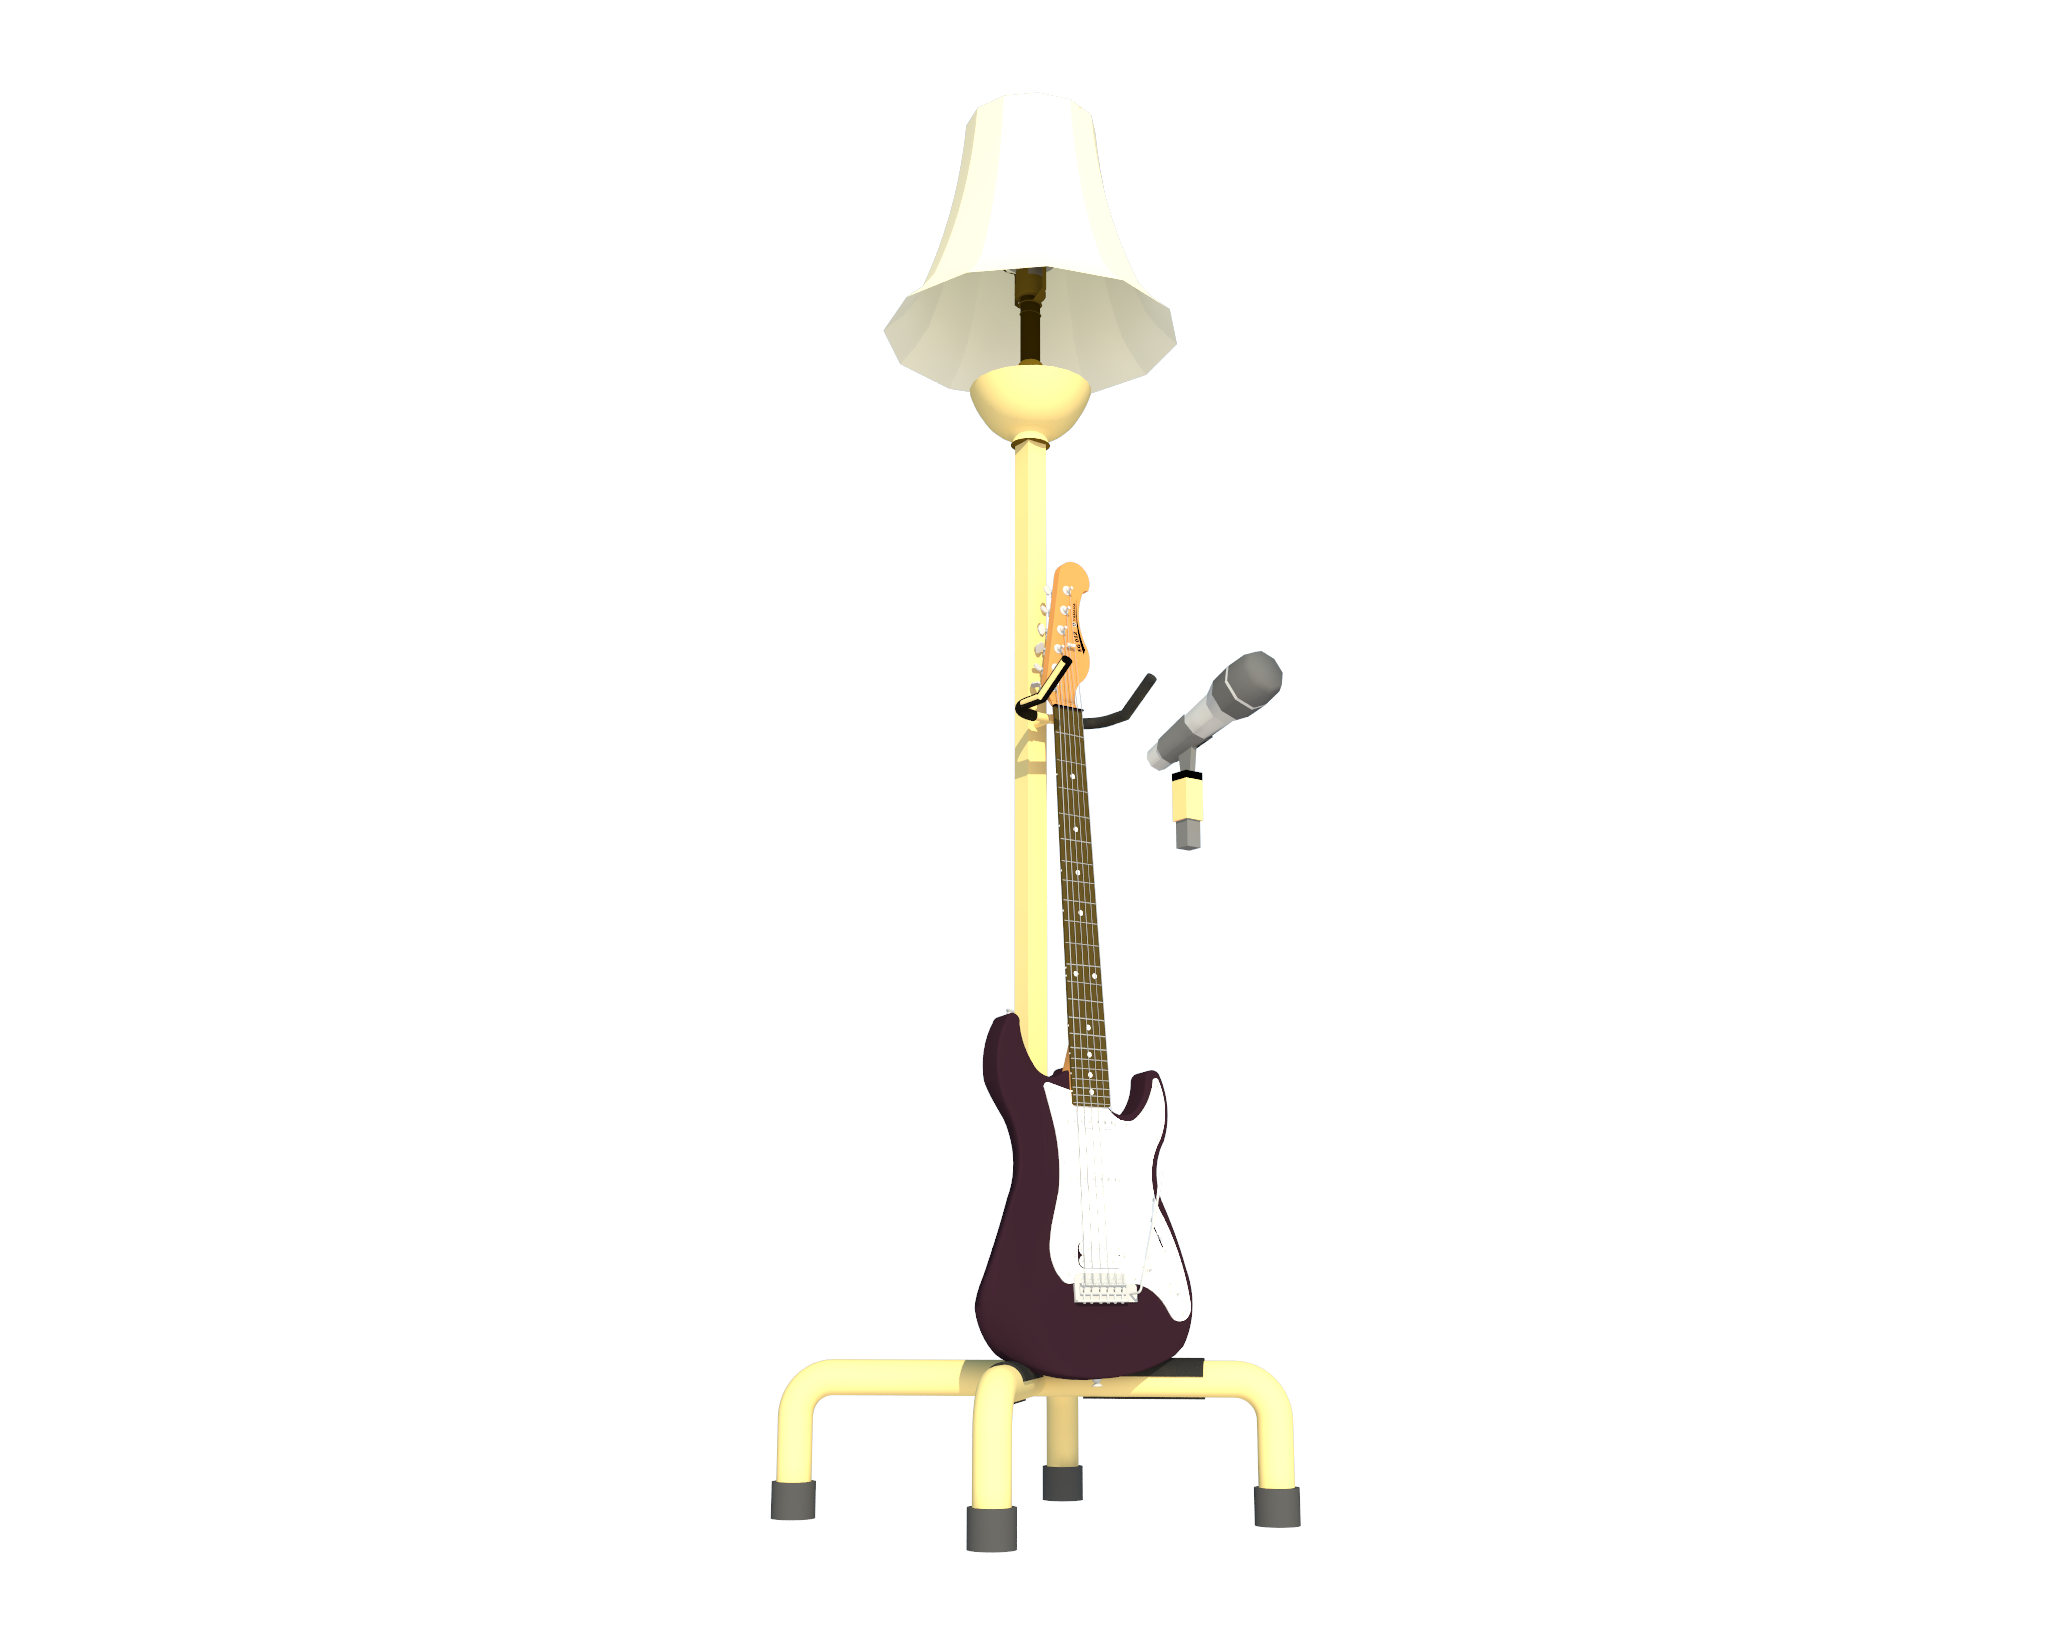 This household invention is a metal stand used to hold up an instrument, such as a guitar.